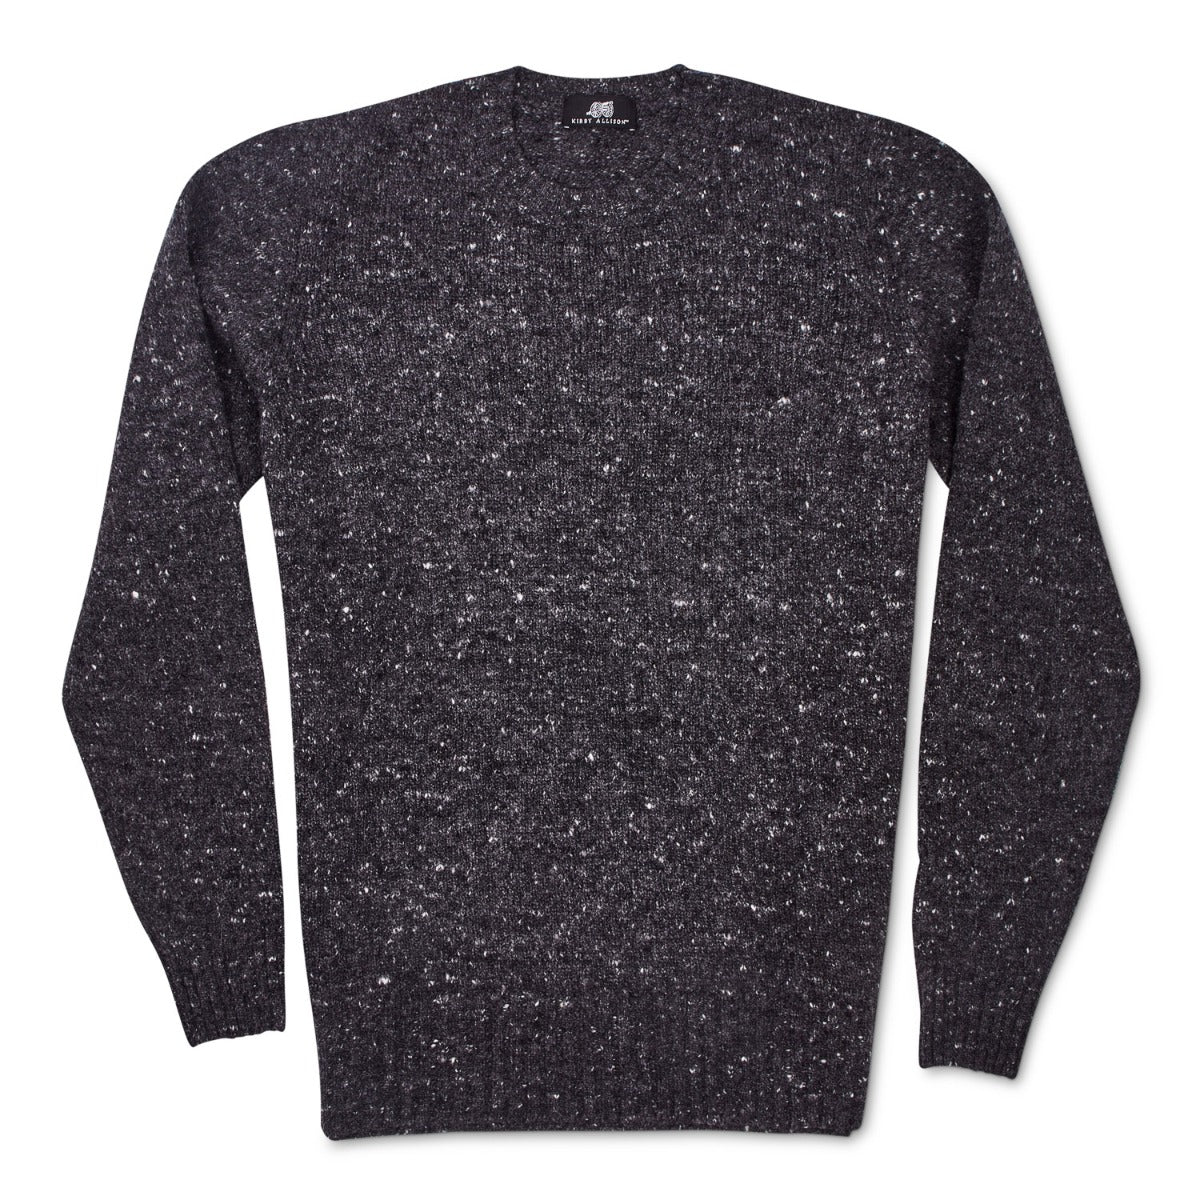 A black KirbyAllison.com Sovereign Grade Grey Donegal Crew Neck sweater with a speckled pattern.